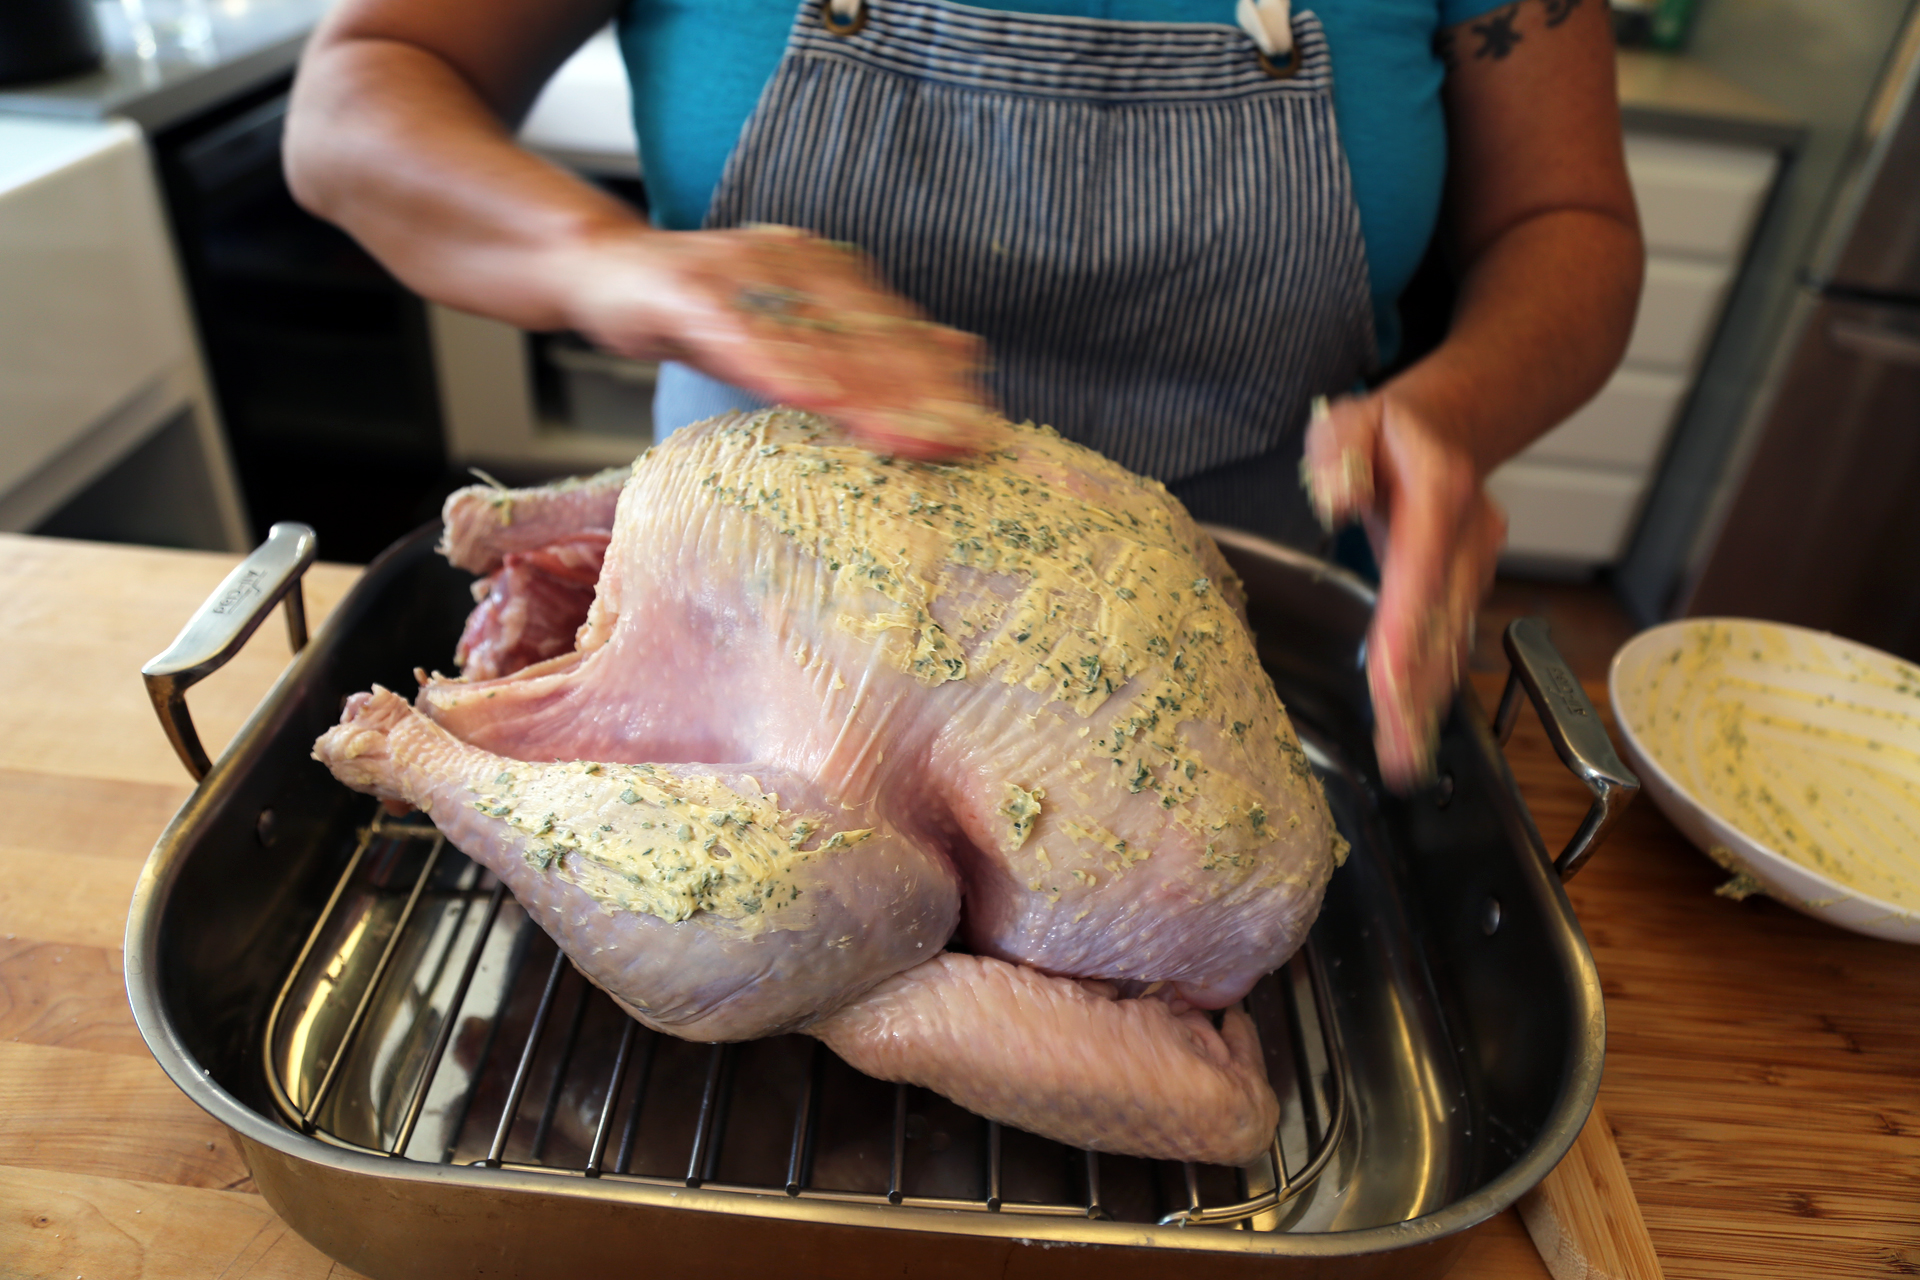 Rub that bird all over with a herb-infused butter, inside and out and under and over the skin.